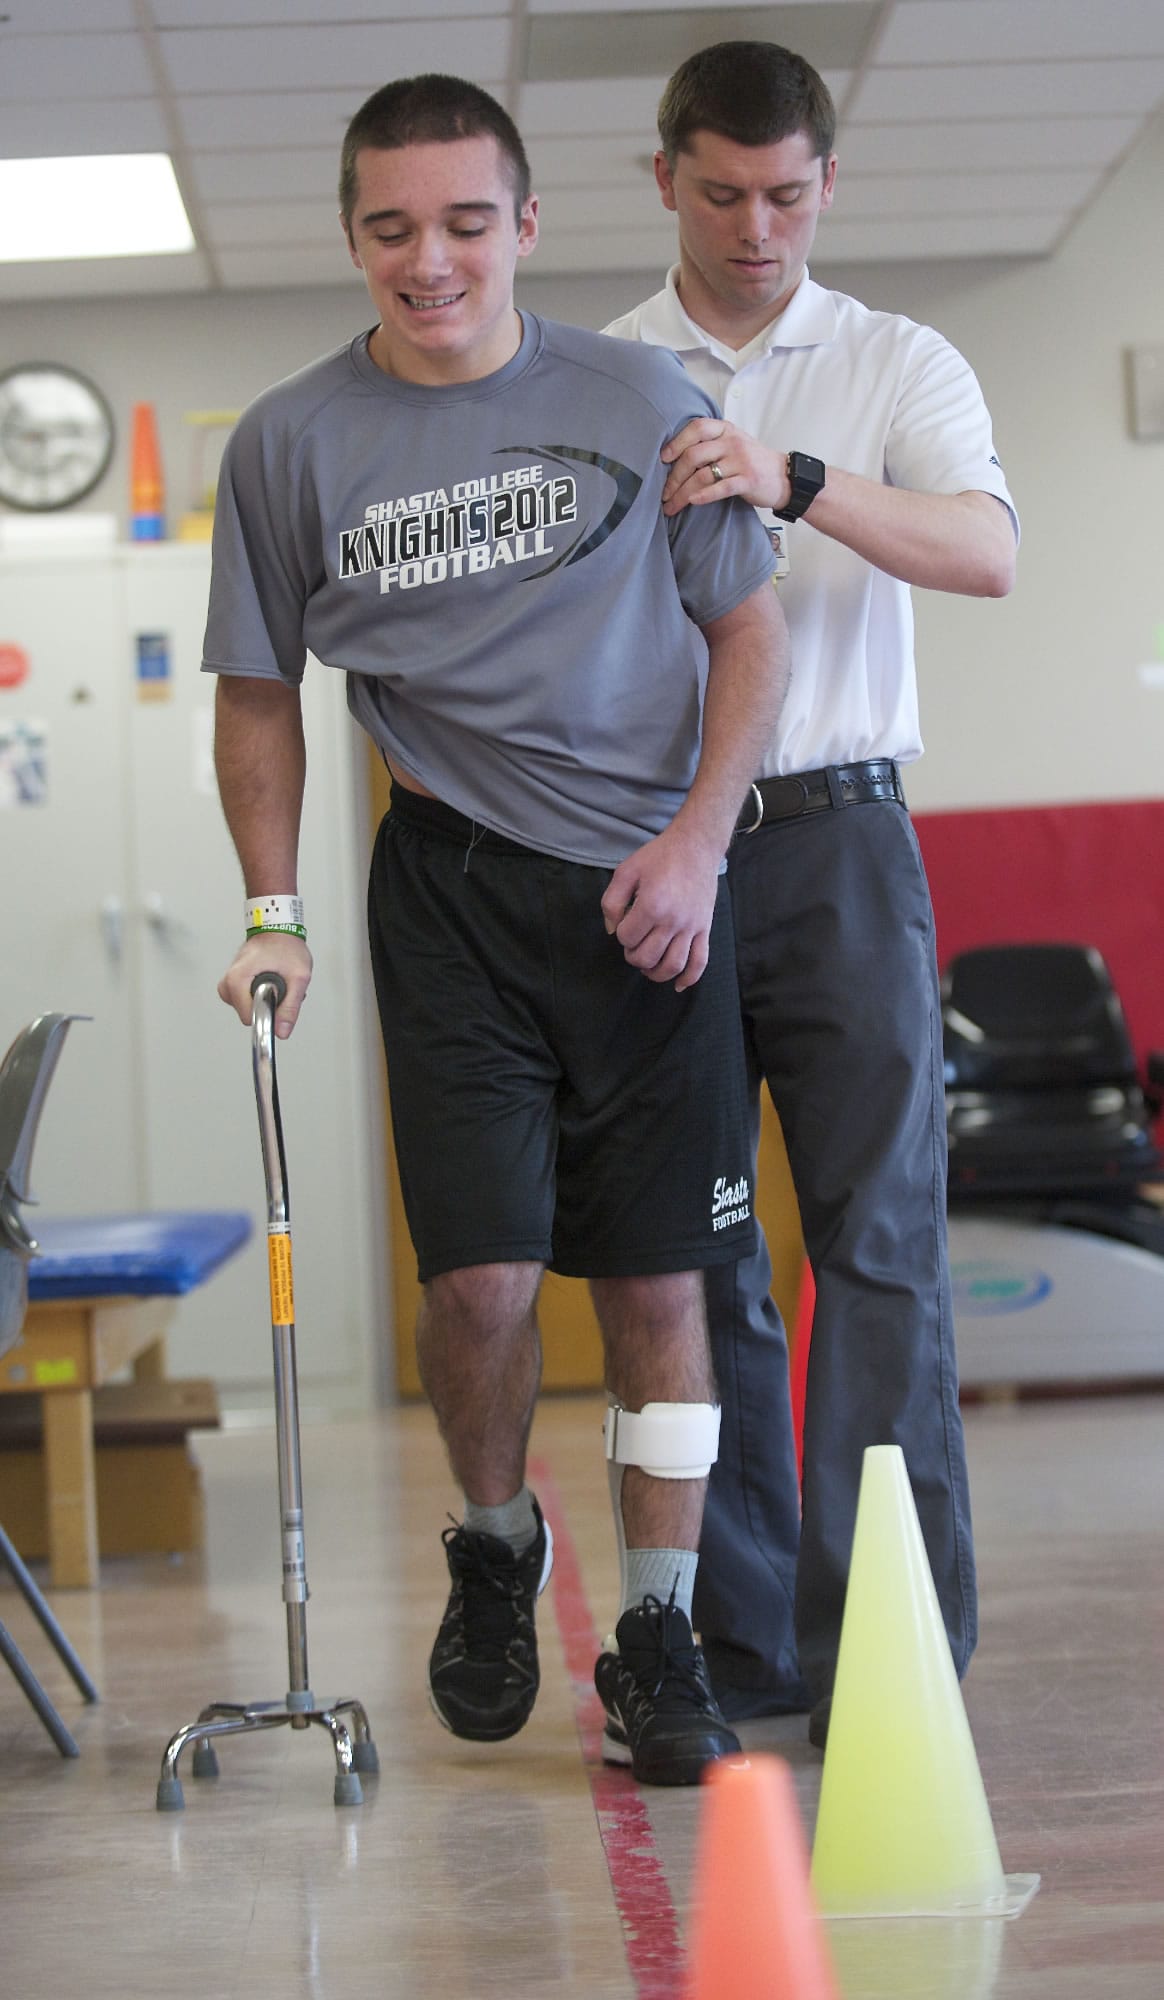 Tyler Burton, who suffered a traumatic brain injury after being assaulted last year, works with his physical therapist, Tim Hughes, at PeaceHealth Southwest Medical Center on Monday. Burton will be discharged from the hospital's inpatient rehabilitation center in the coming days.